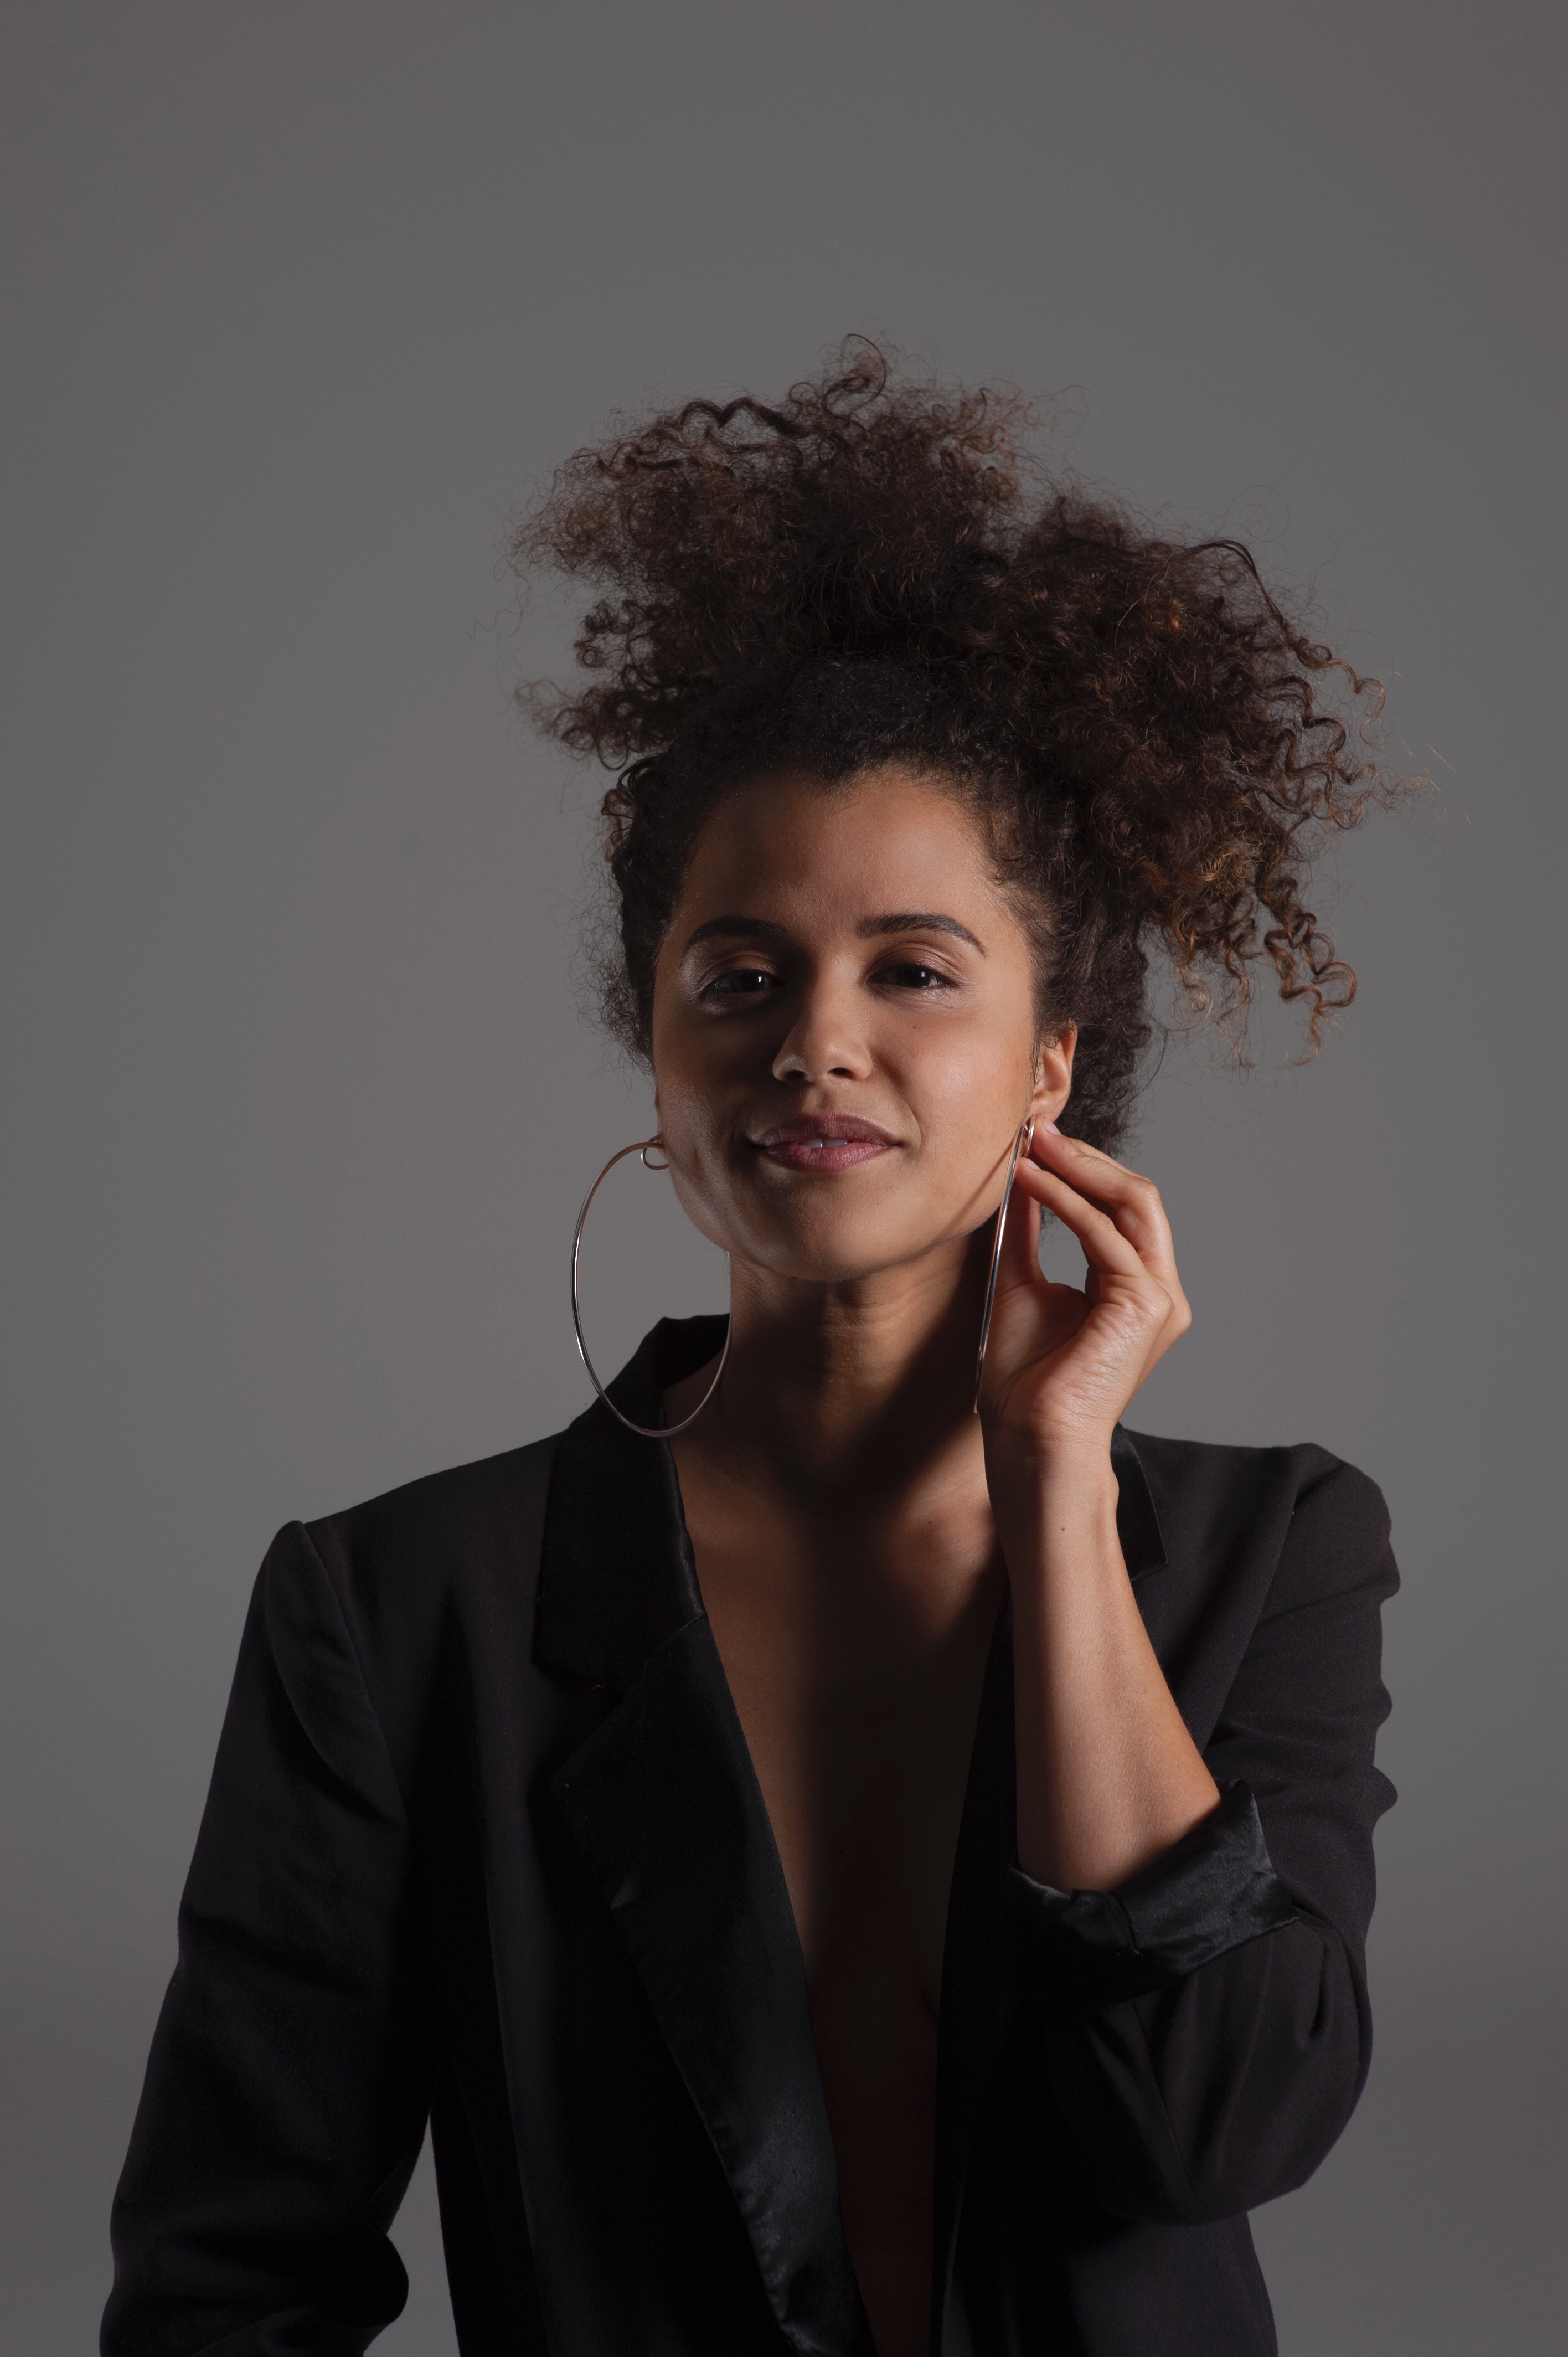 From the waist up in front of a grey background is an African woman with light complexion and big curly hair tied up. She is holding her very large hoop earrings and wearing a black blazer suit jacket.